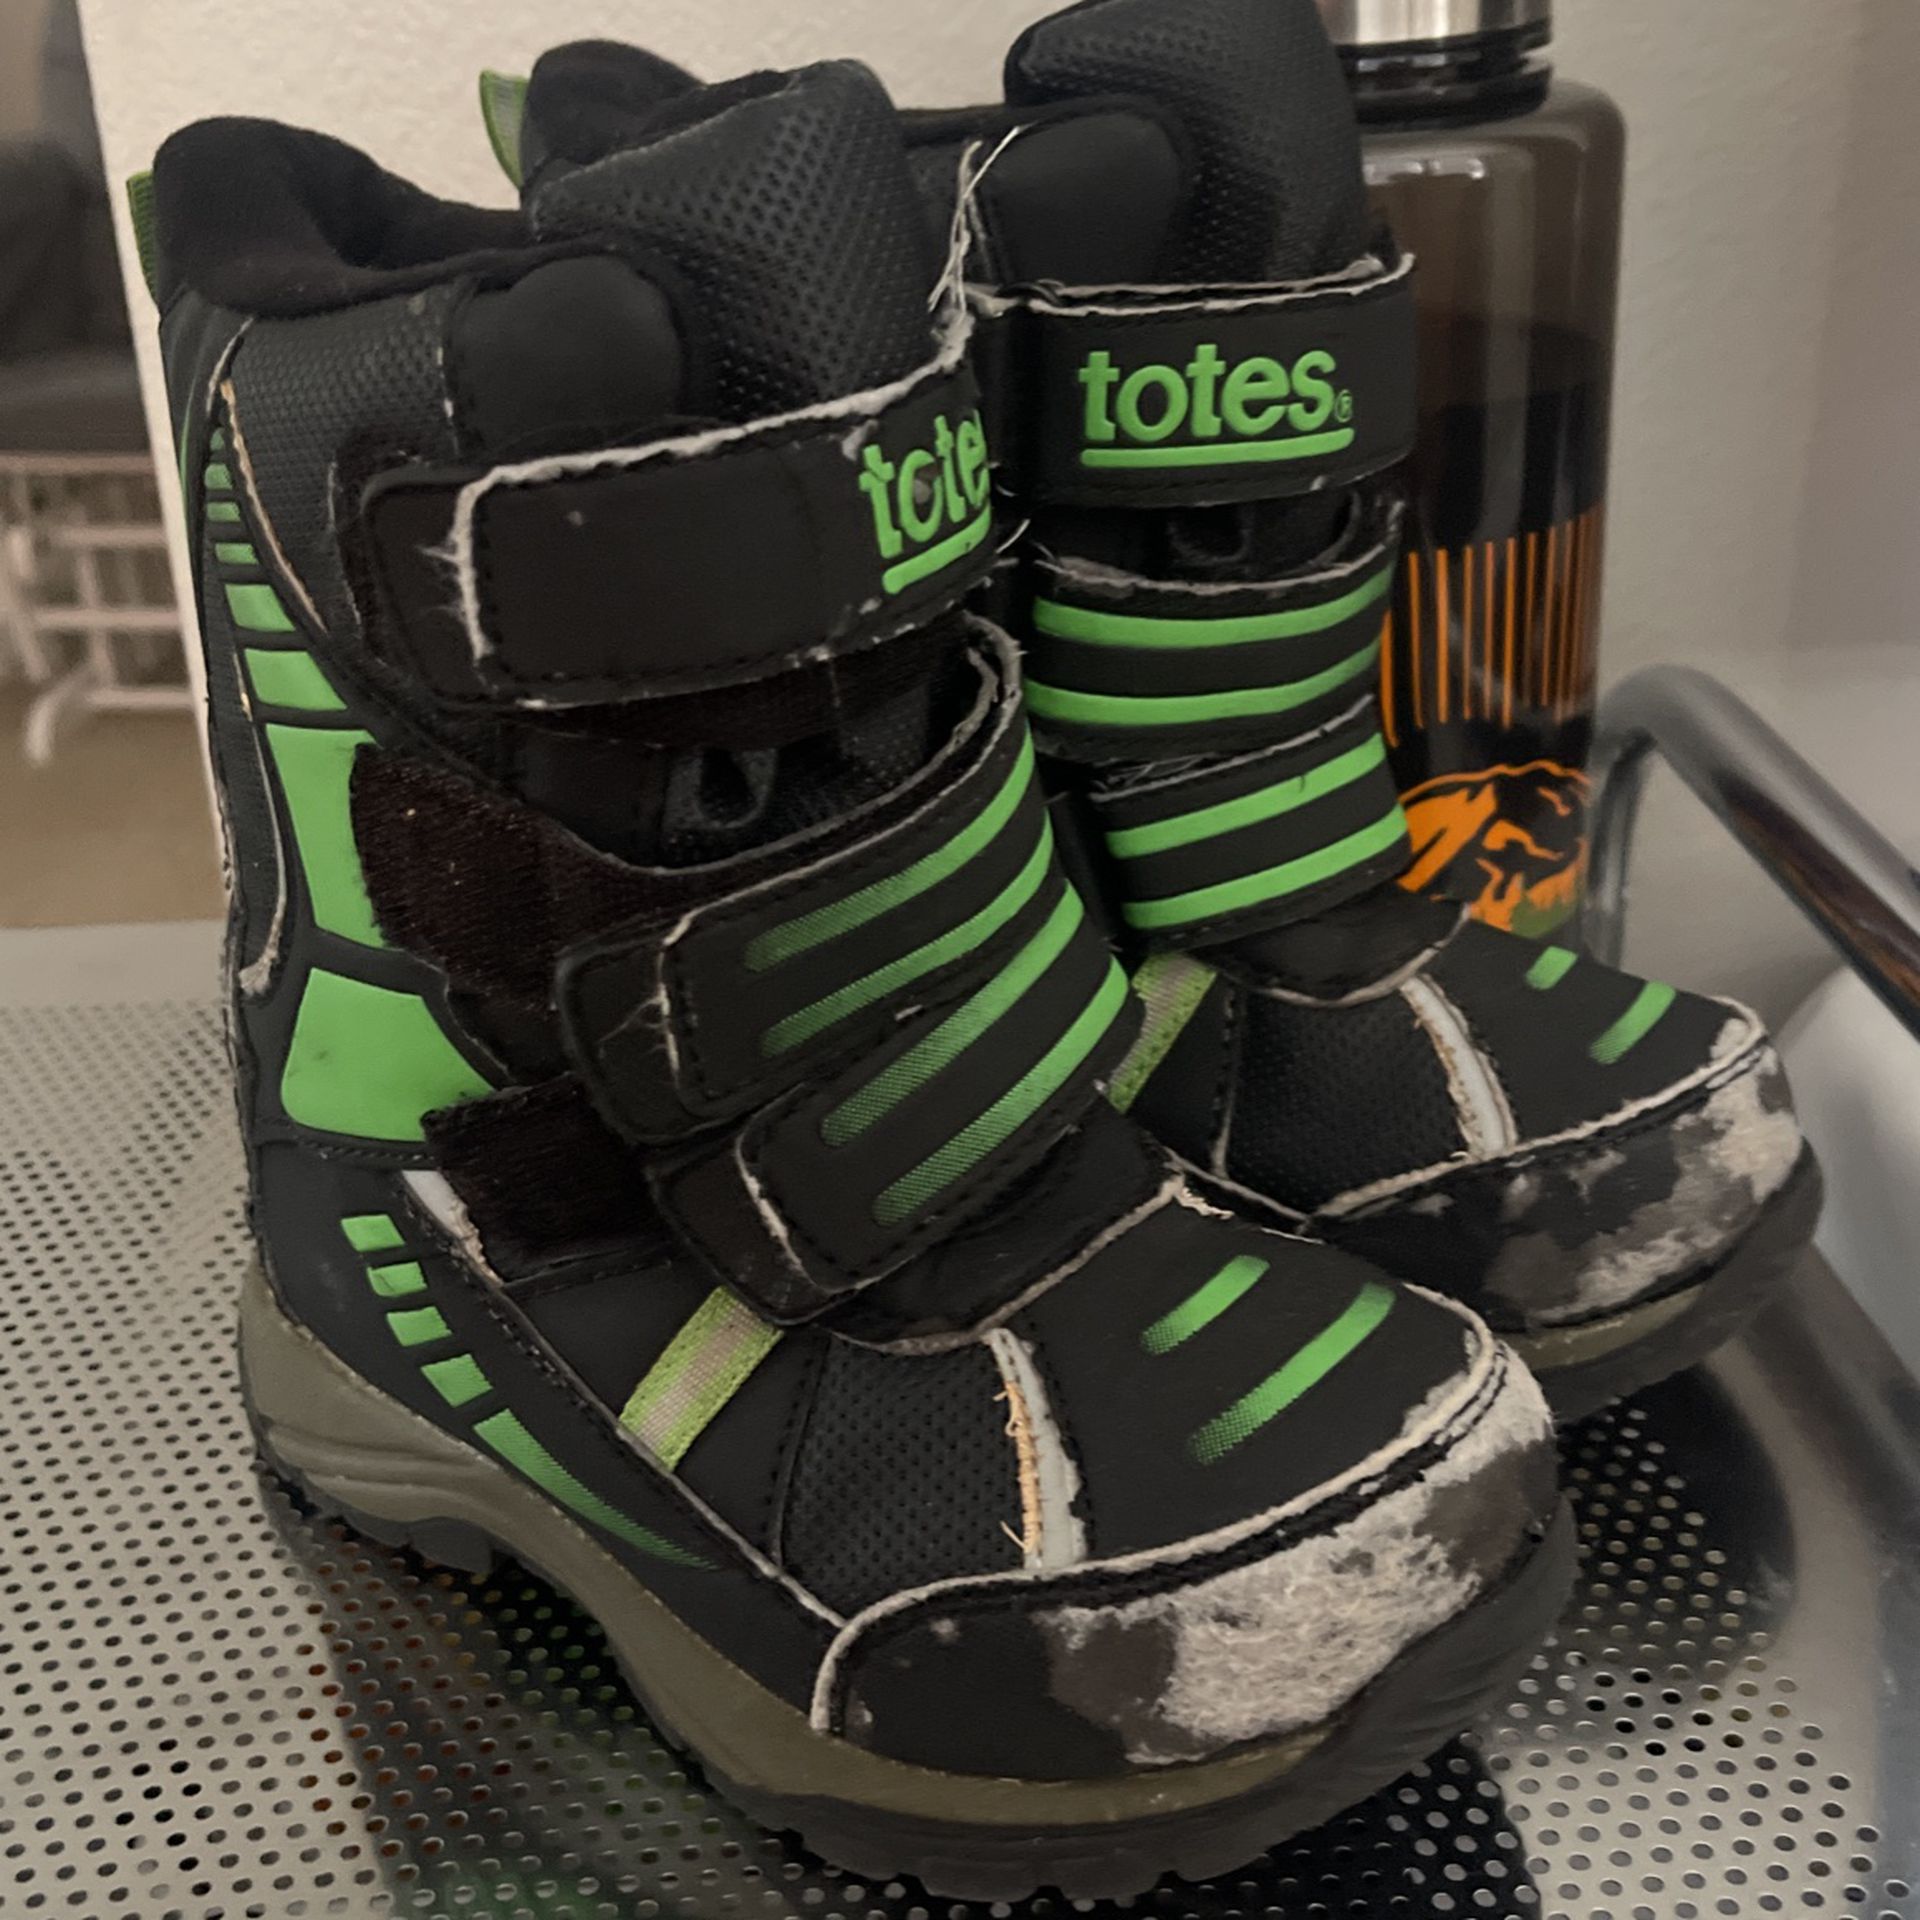 Free Used Snow Boots - TOTES Size 13 